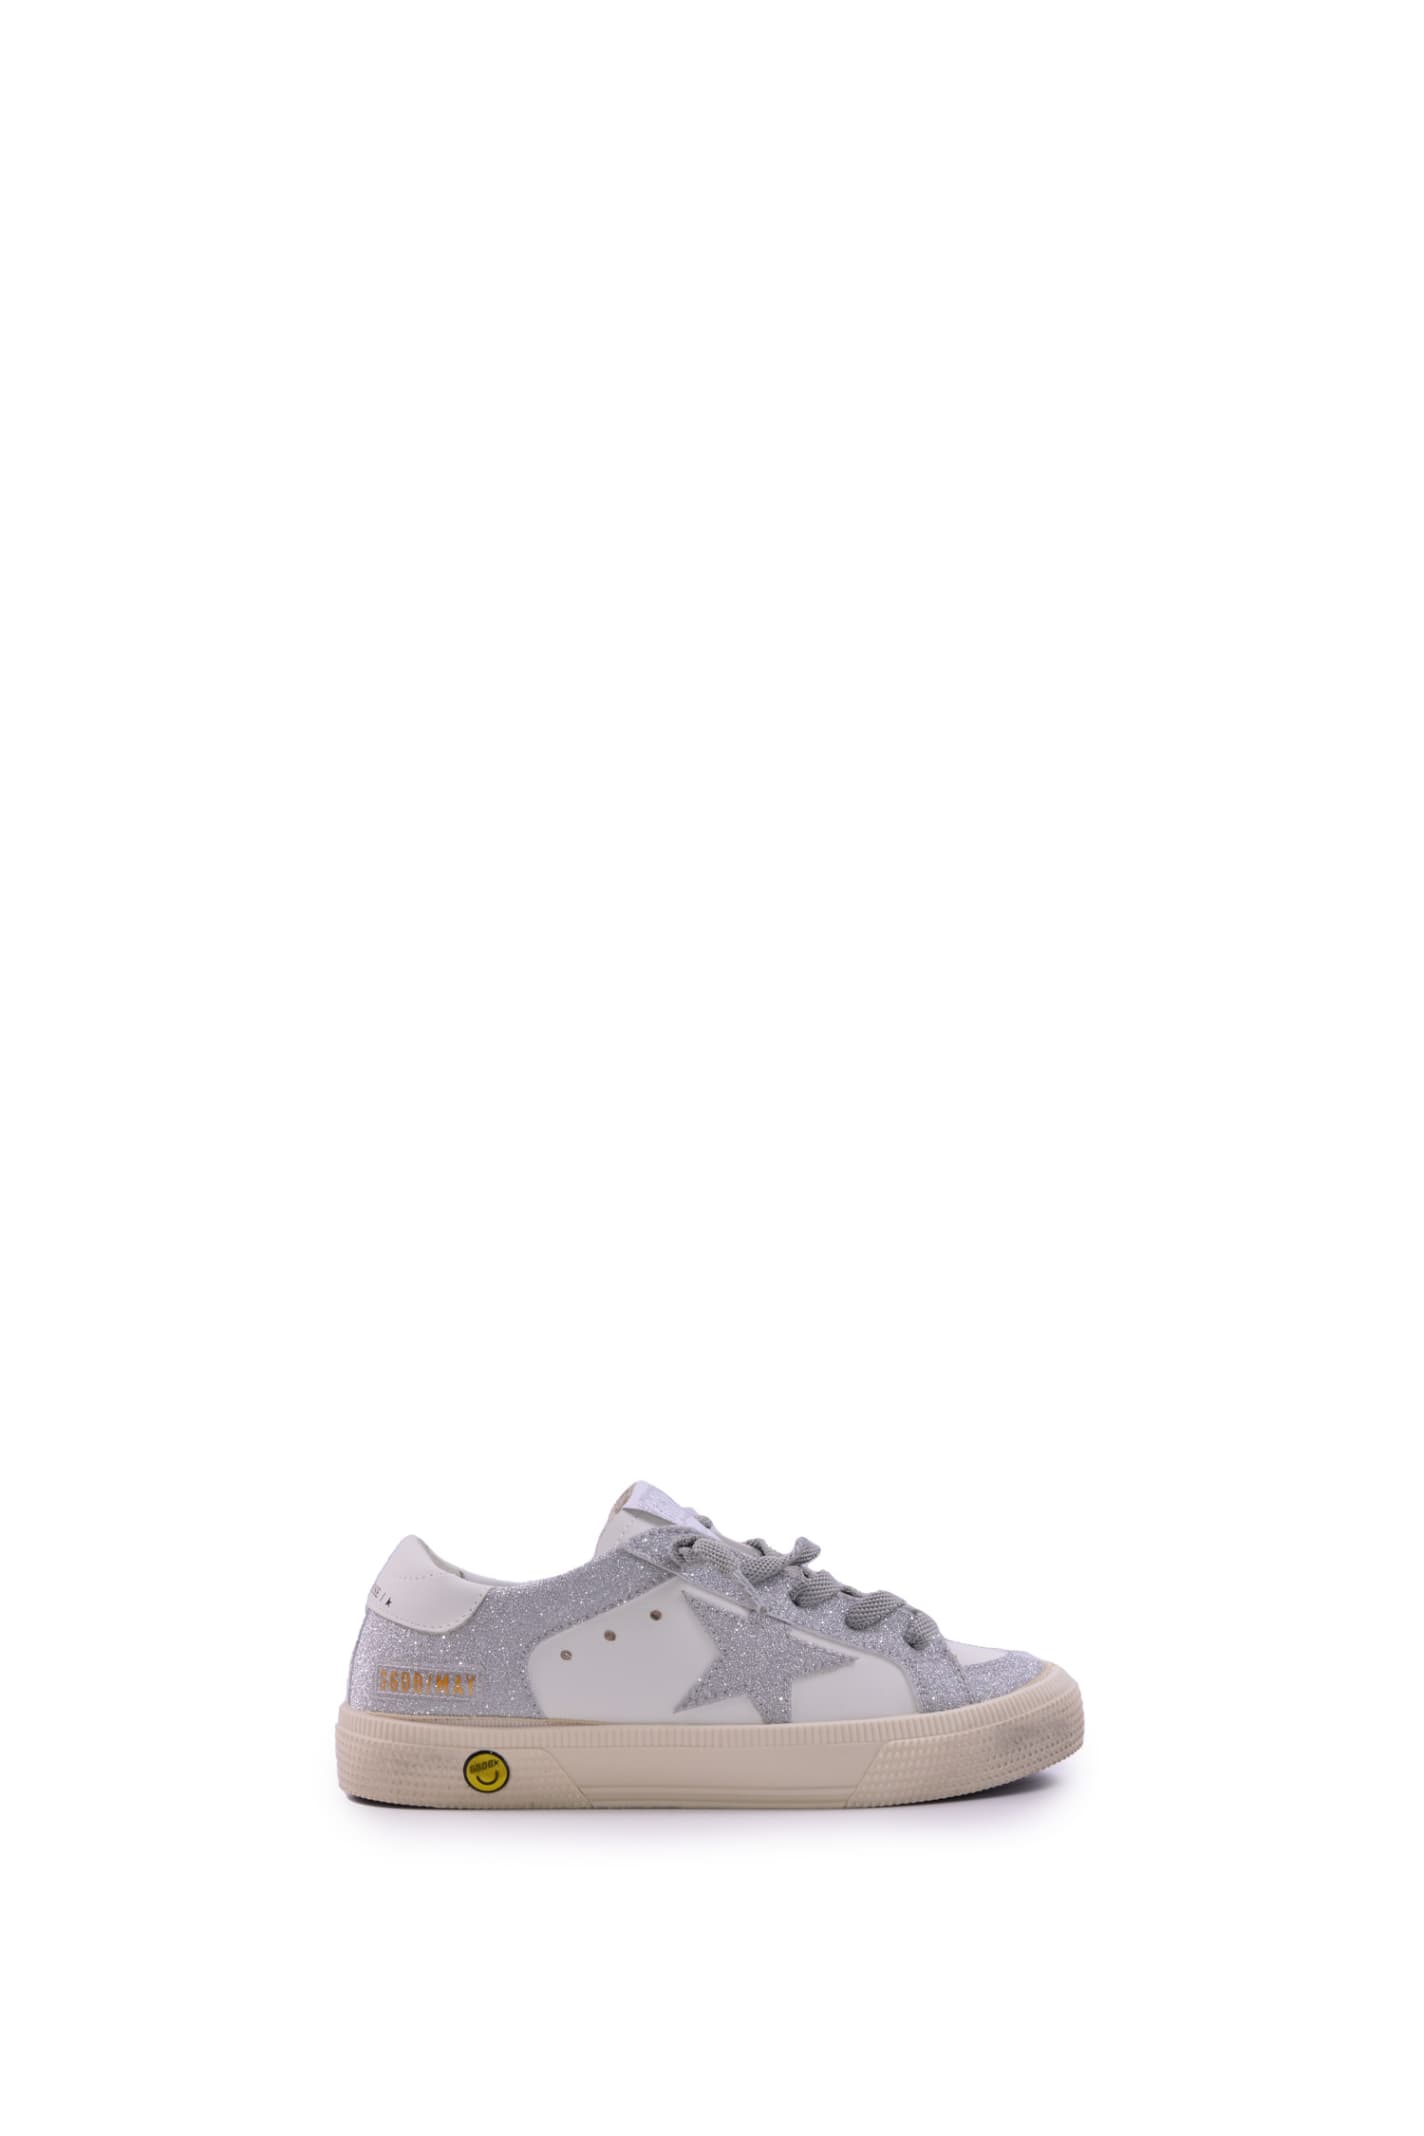 Golden Goose Leather Sneakers With Glitter